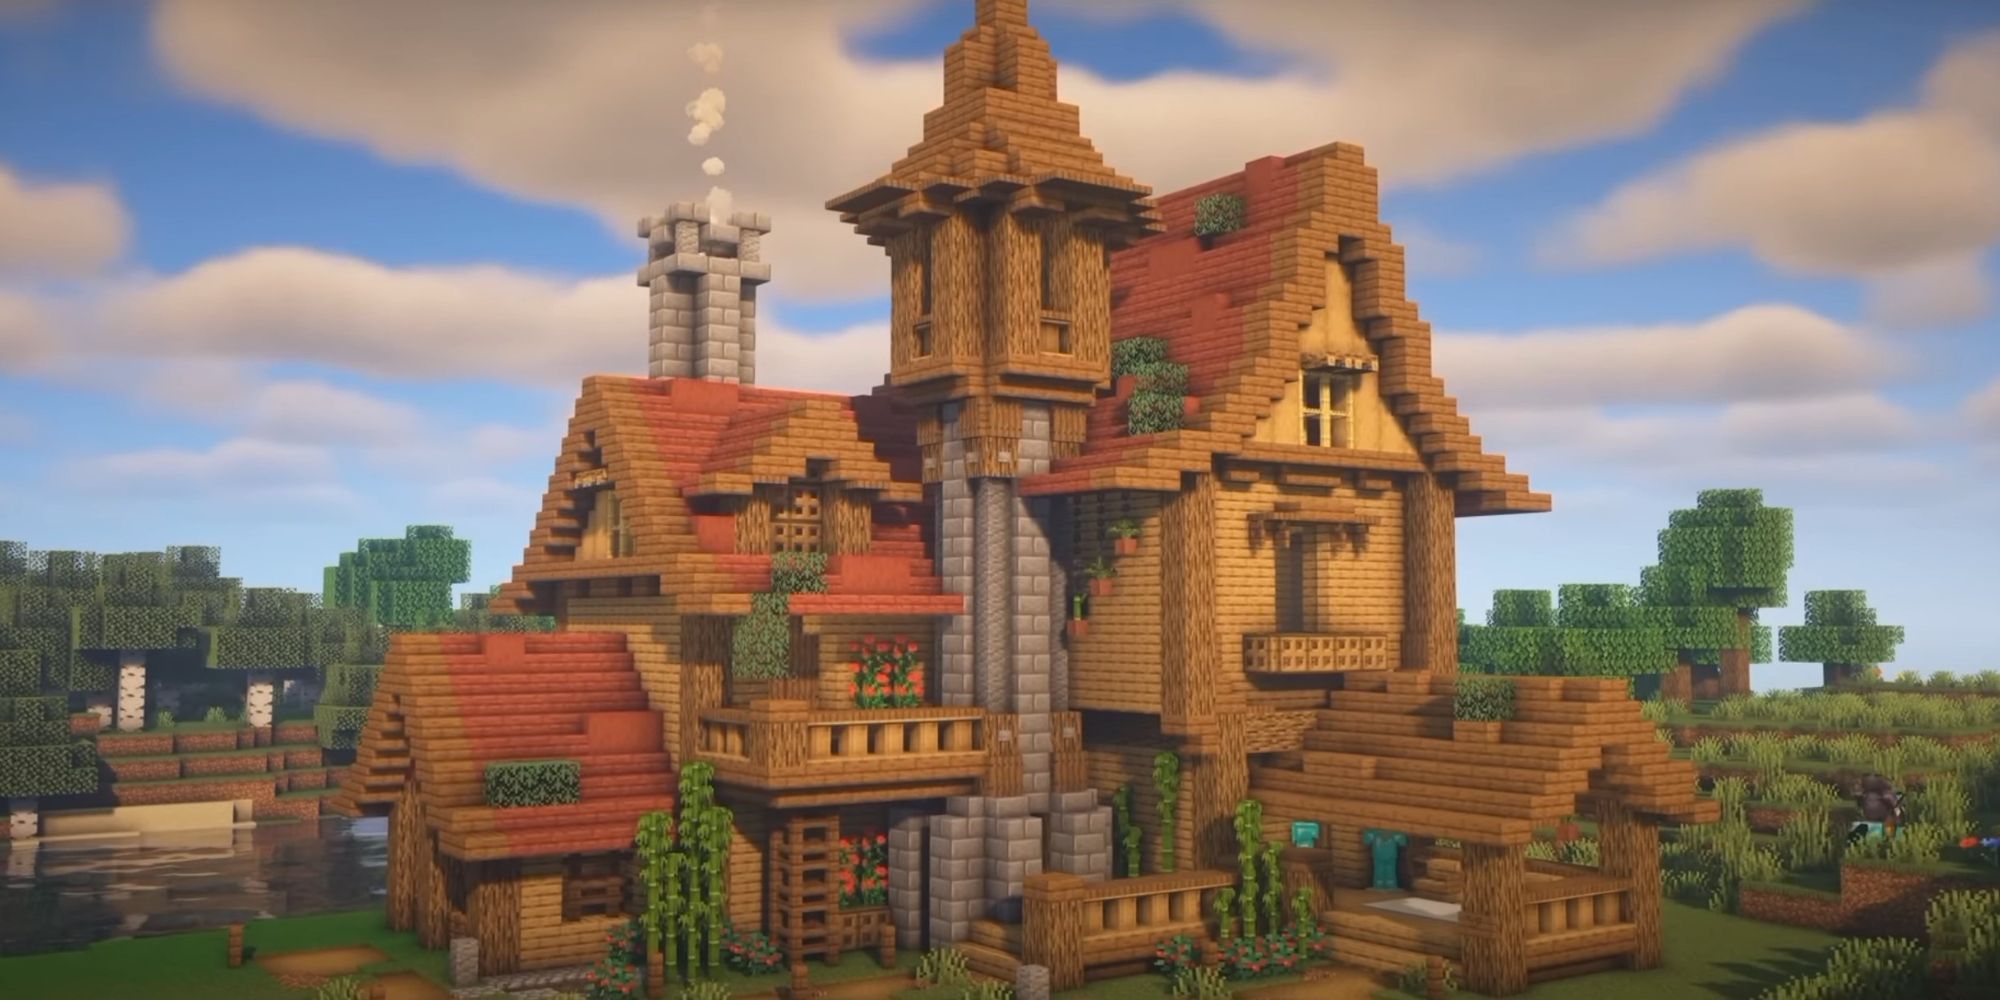 An image from Minecraft of a classic Wooden Mansion. This house combines the different wood types in minecraft, and adds a large tower, to create an appealing home.